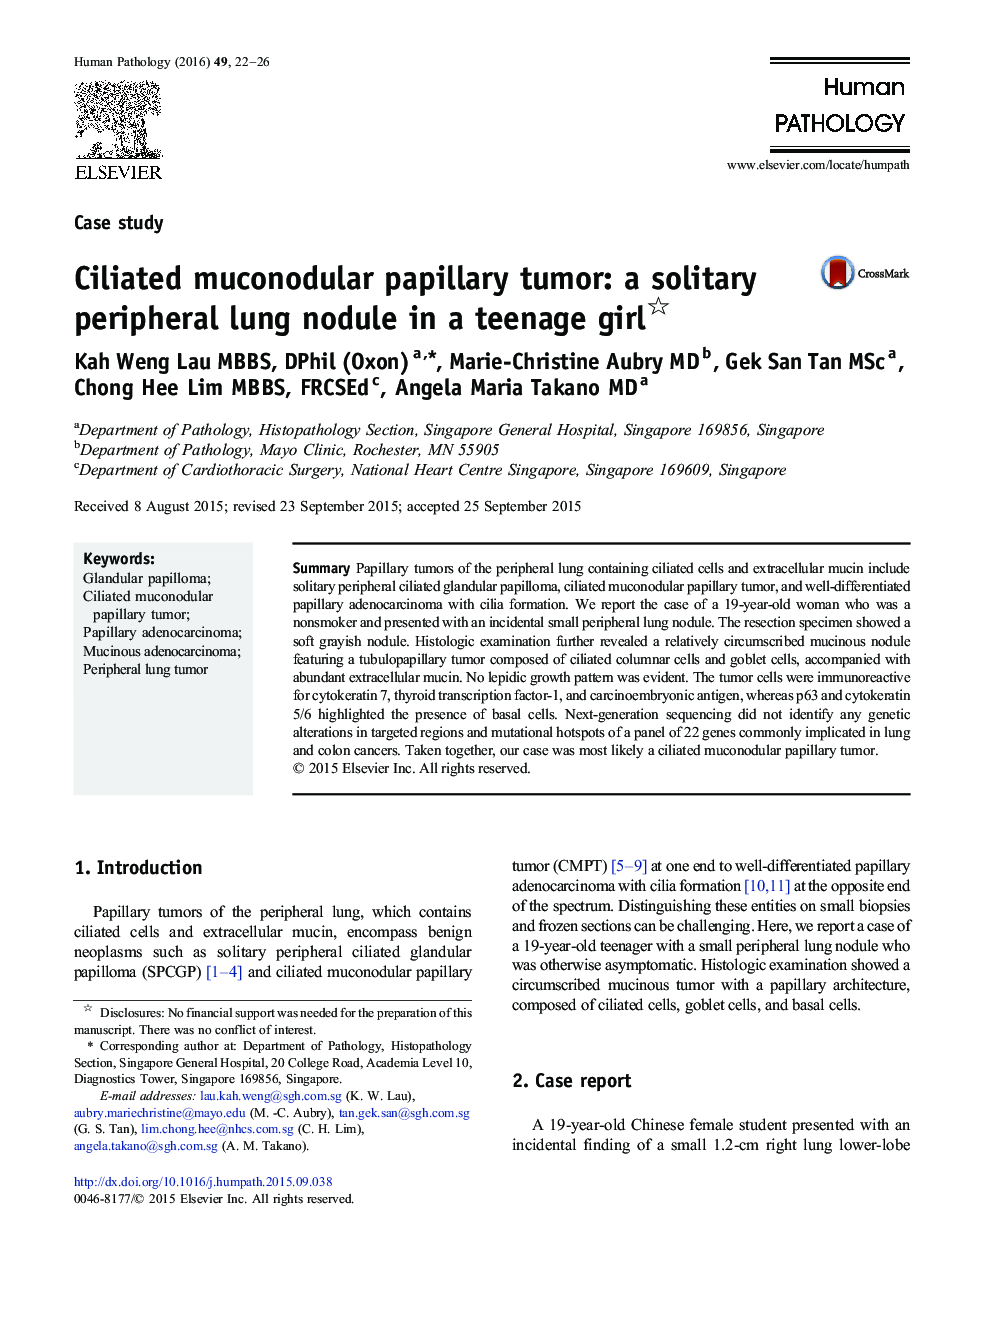 Ciliated muconodular papillary tumor: a solitary peripheral lung nodule in a teenage girl 